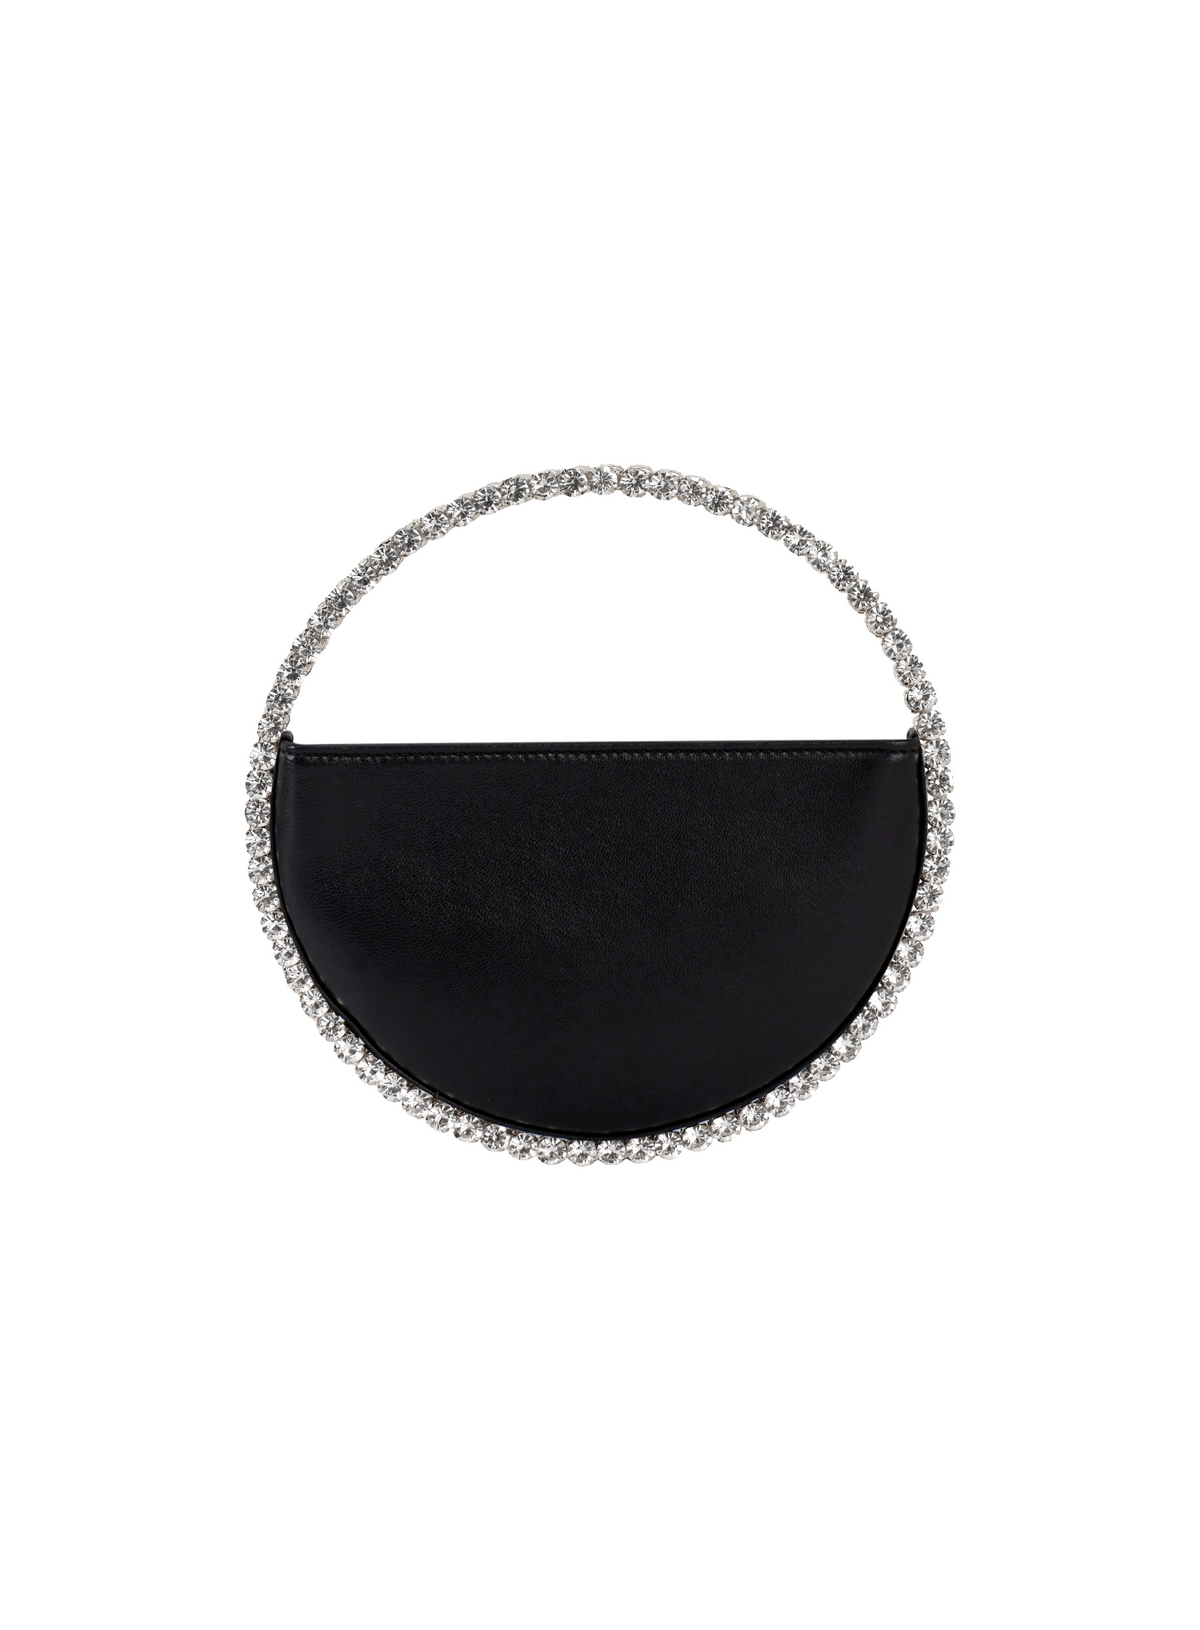 Picture of BLACK ROUND BAG